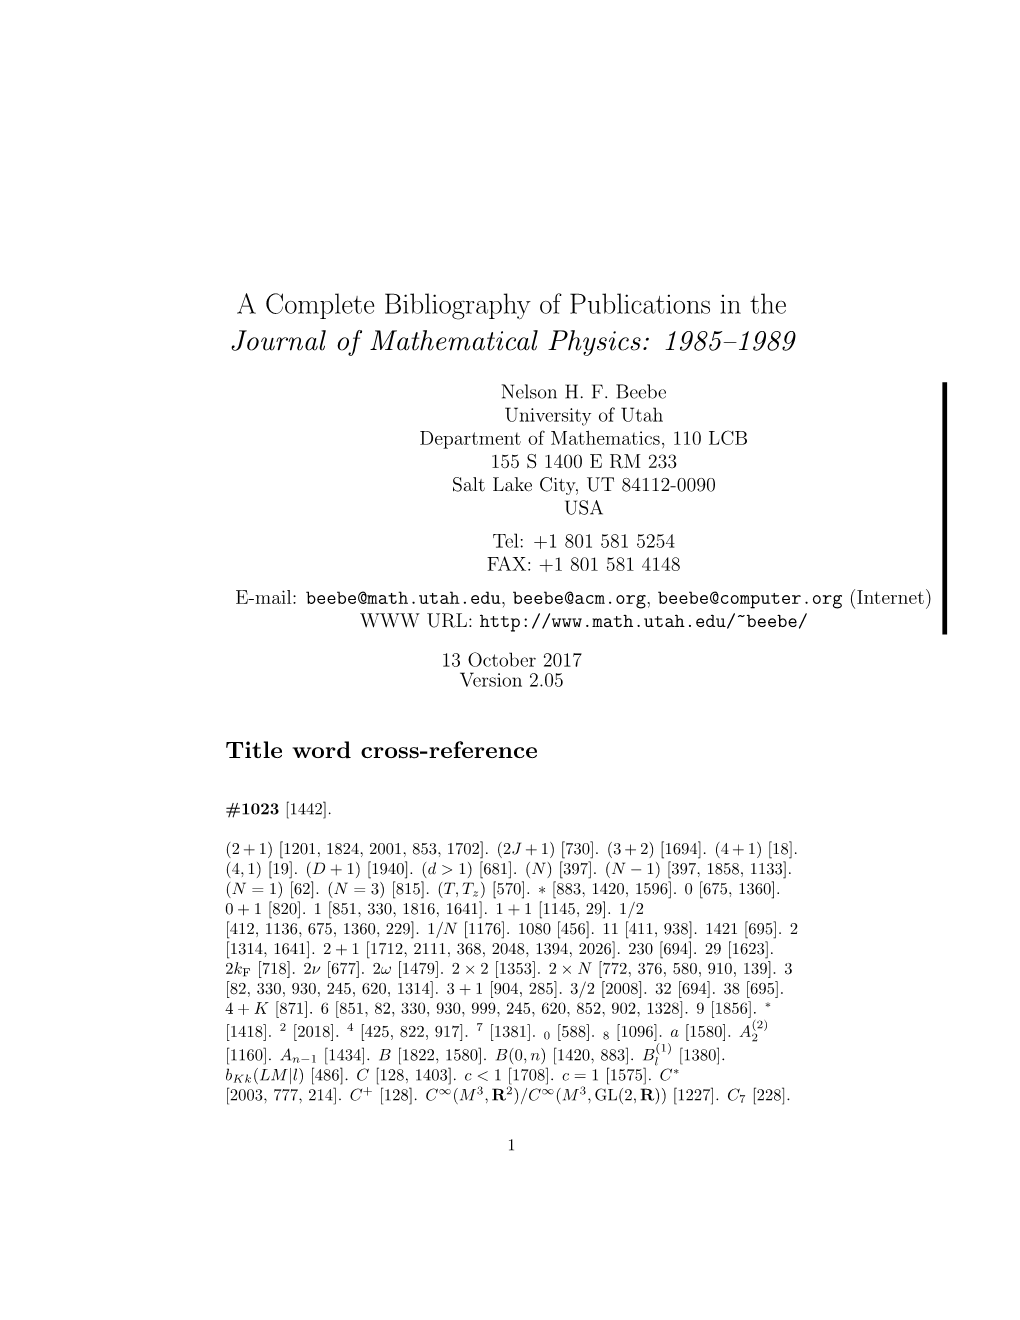 A Complete Bibliography of Publications in the Journal of Mathematical Physics: 1985–1989